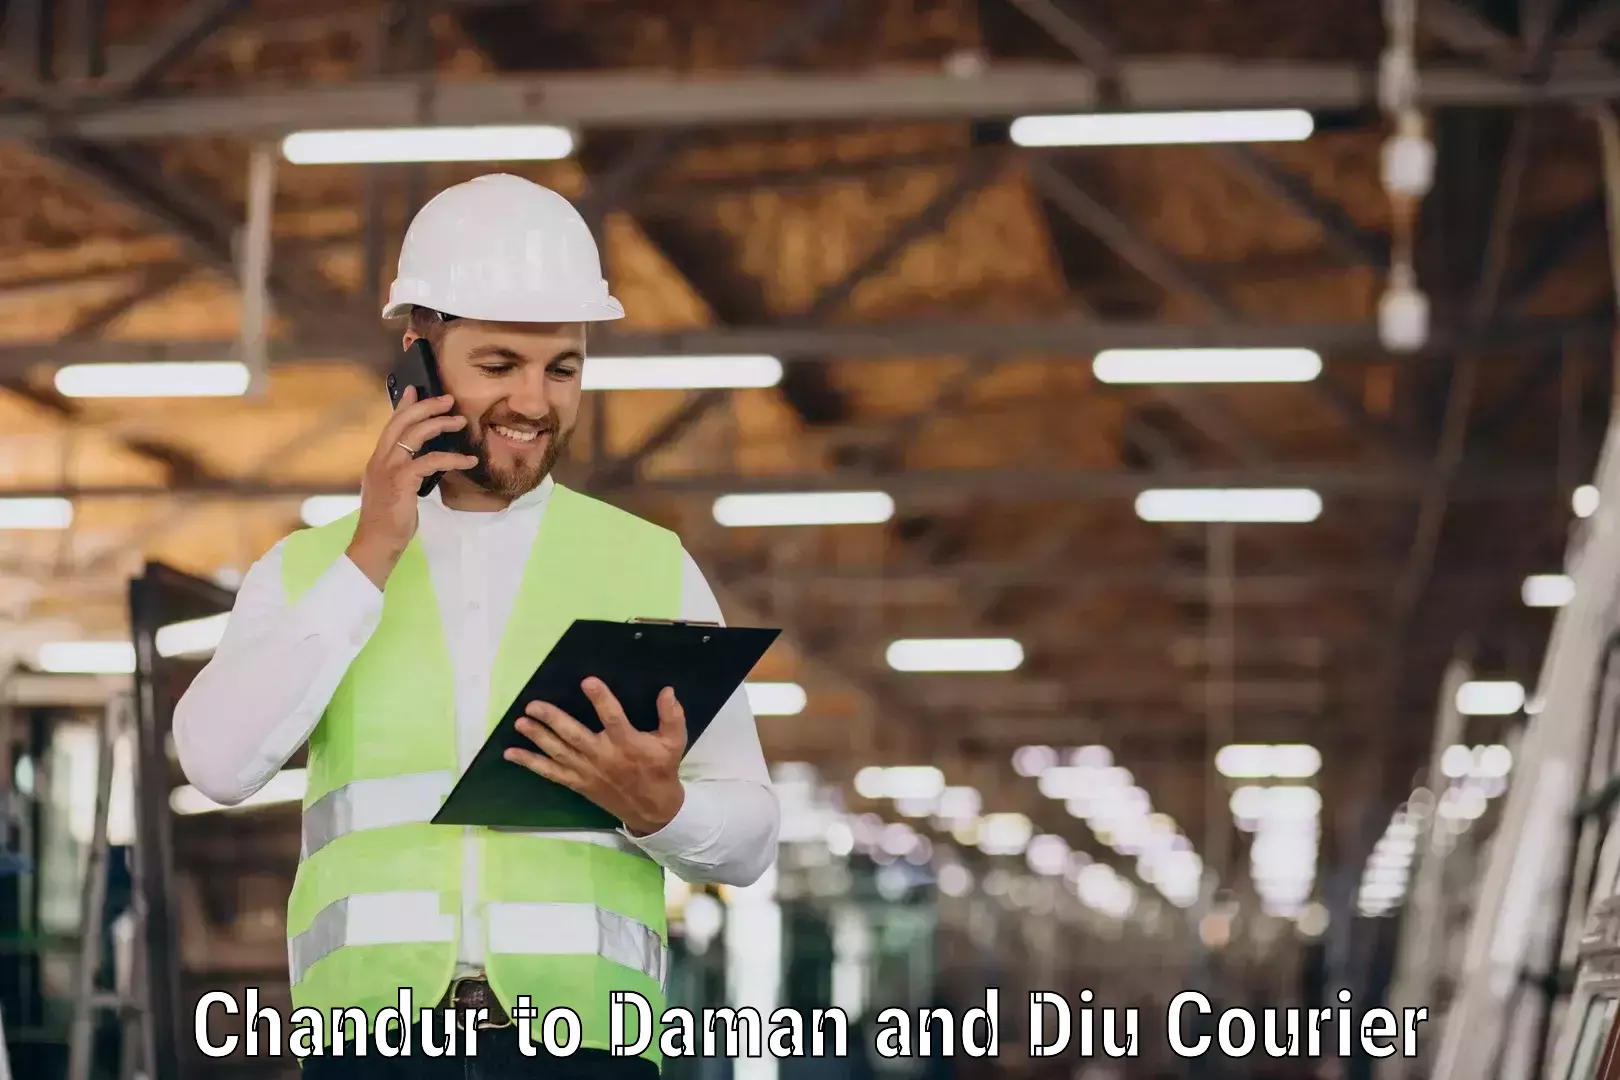 Courier service innovation Chandur to Daman and Diu